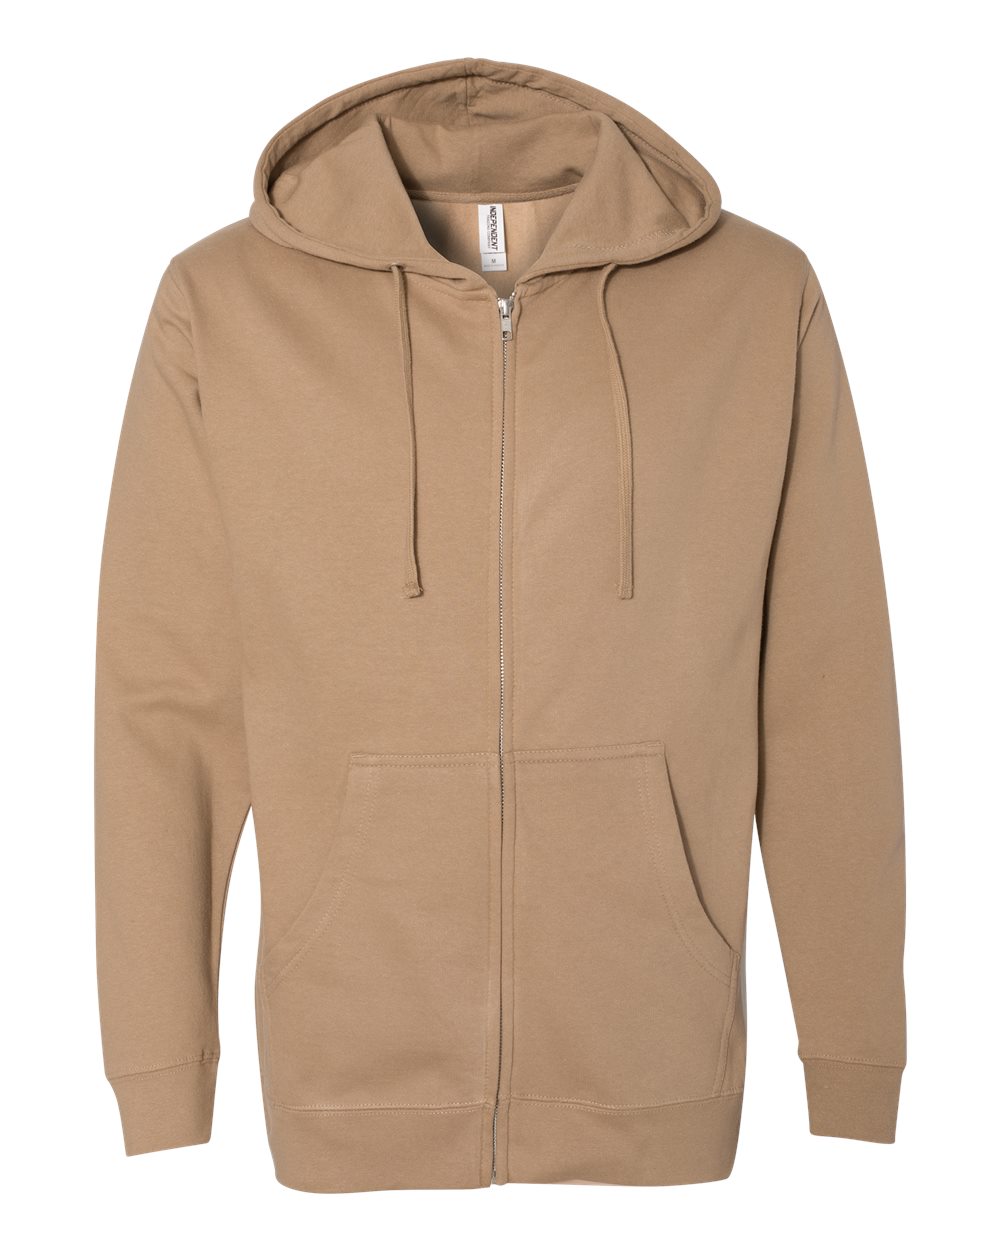 Independent Trading Co Midweight Hooded Full-Zip Sweatshirt SS4500Z up ...